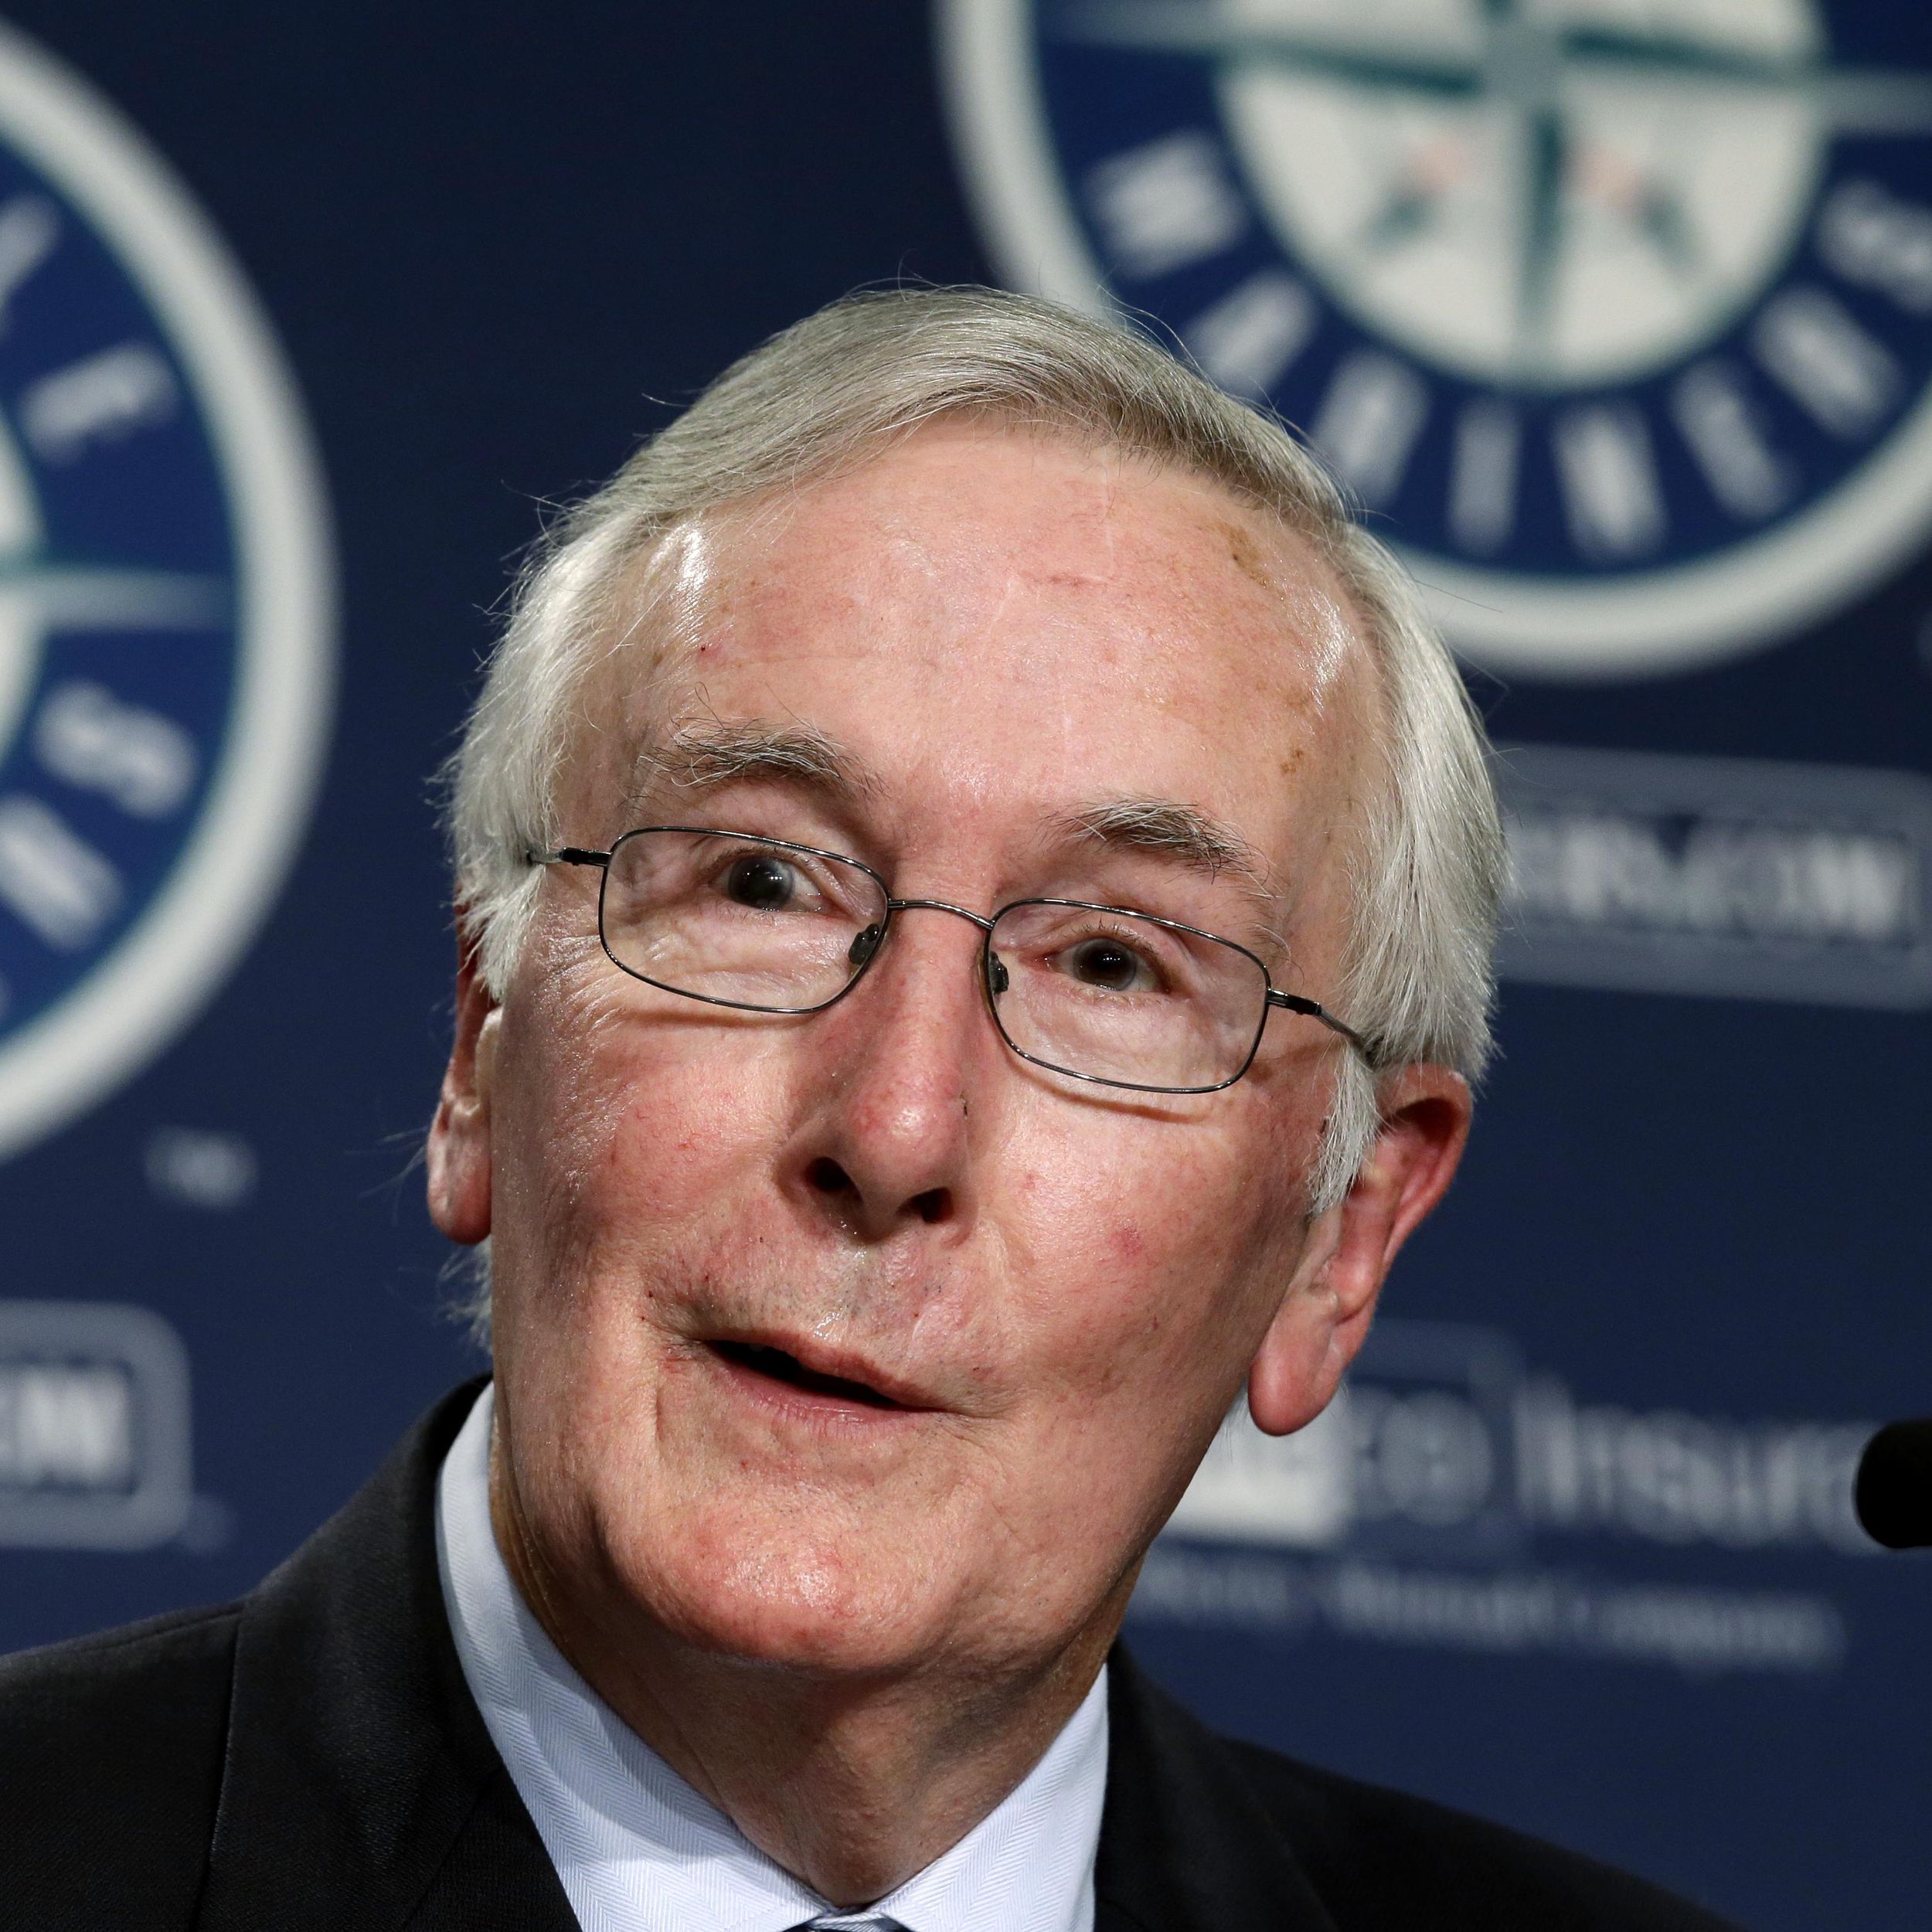 Mariners CEO John Stanton: 'The goal is to win a World Series here